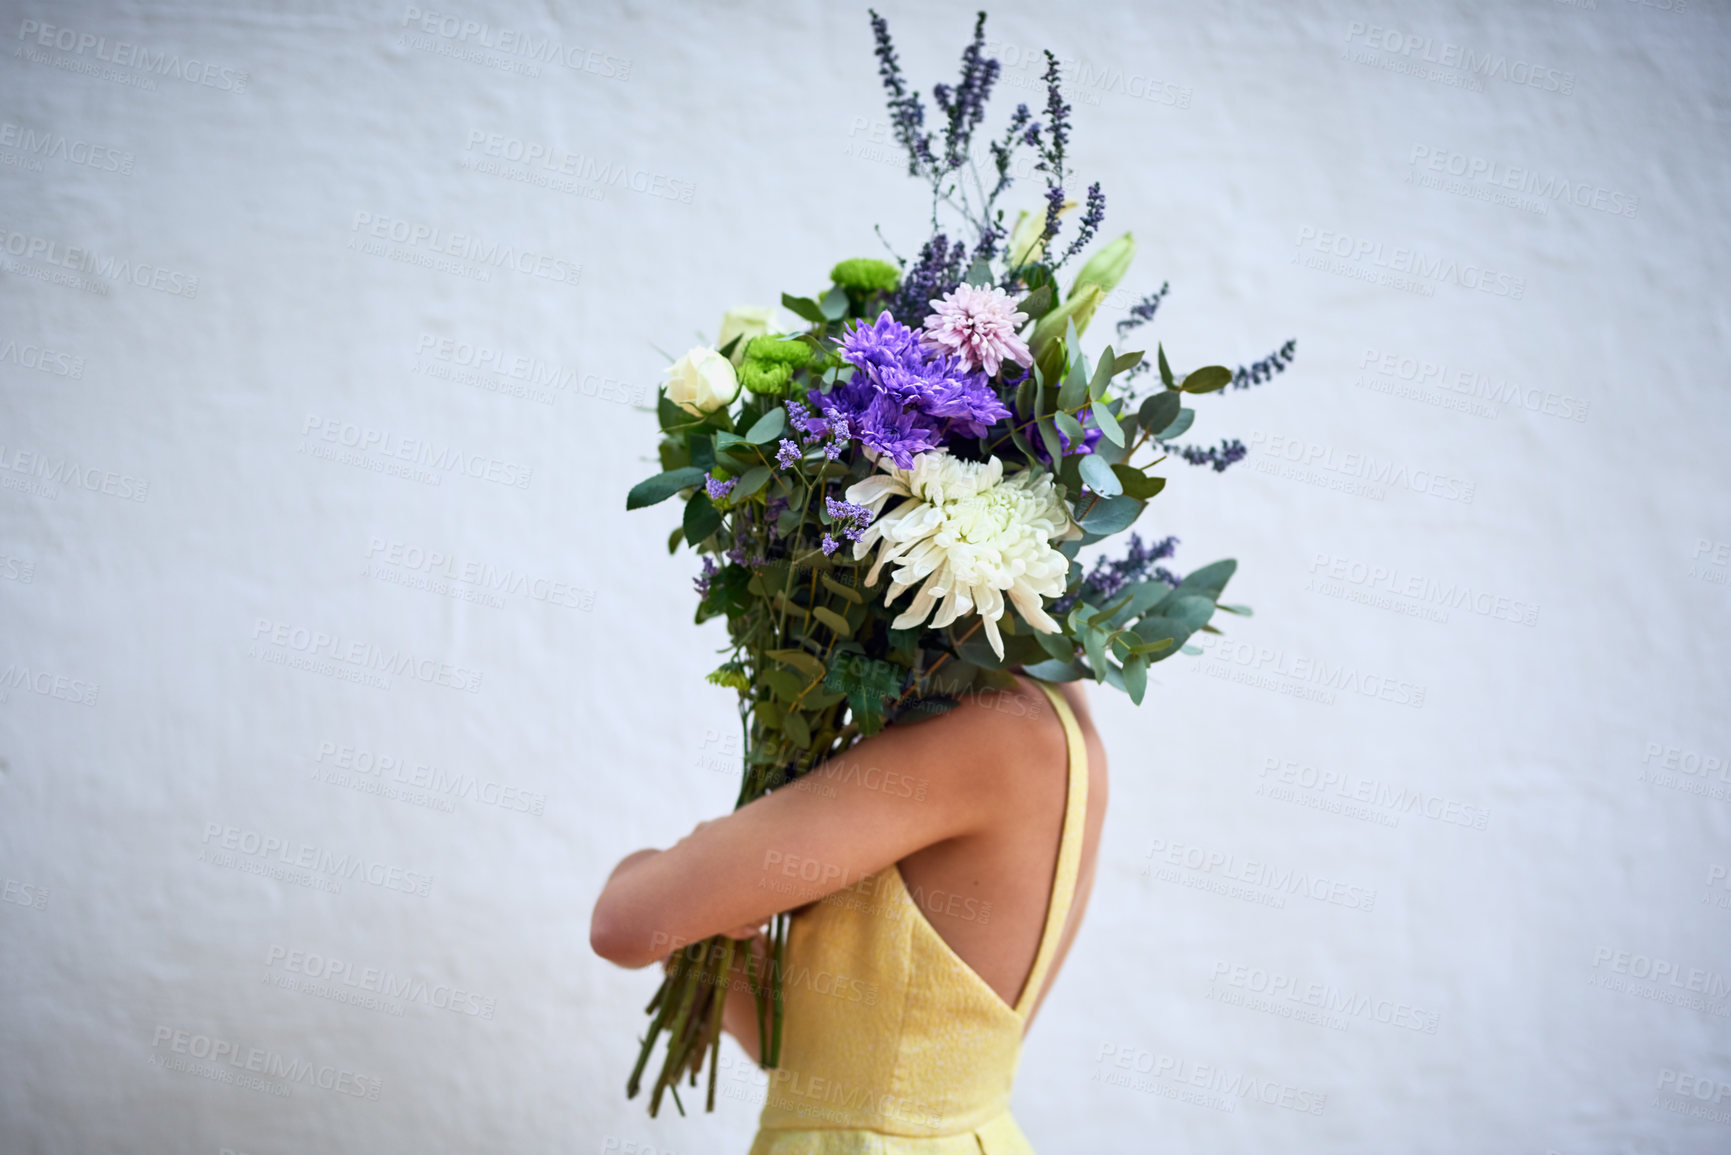 Buy stock photo Studio shot of an unrecognizable woman holding a bouquet of flowers while standing against a grey background